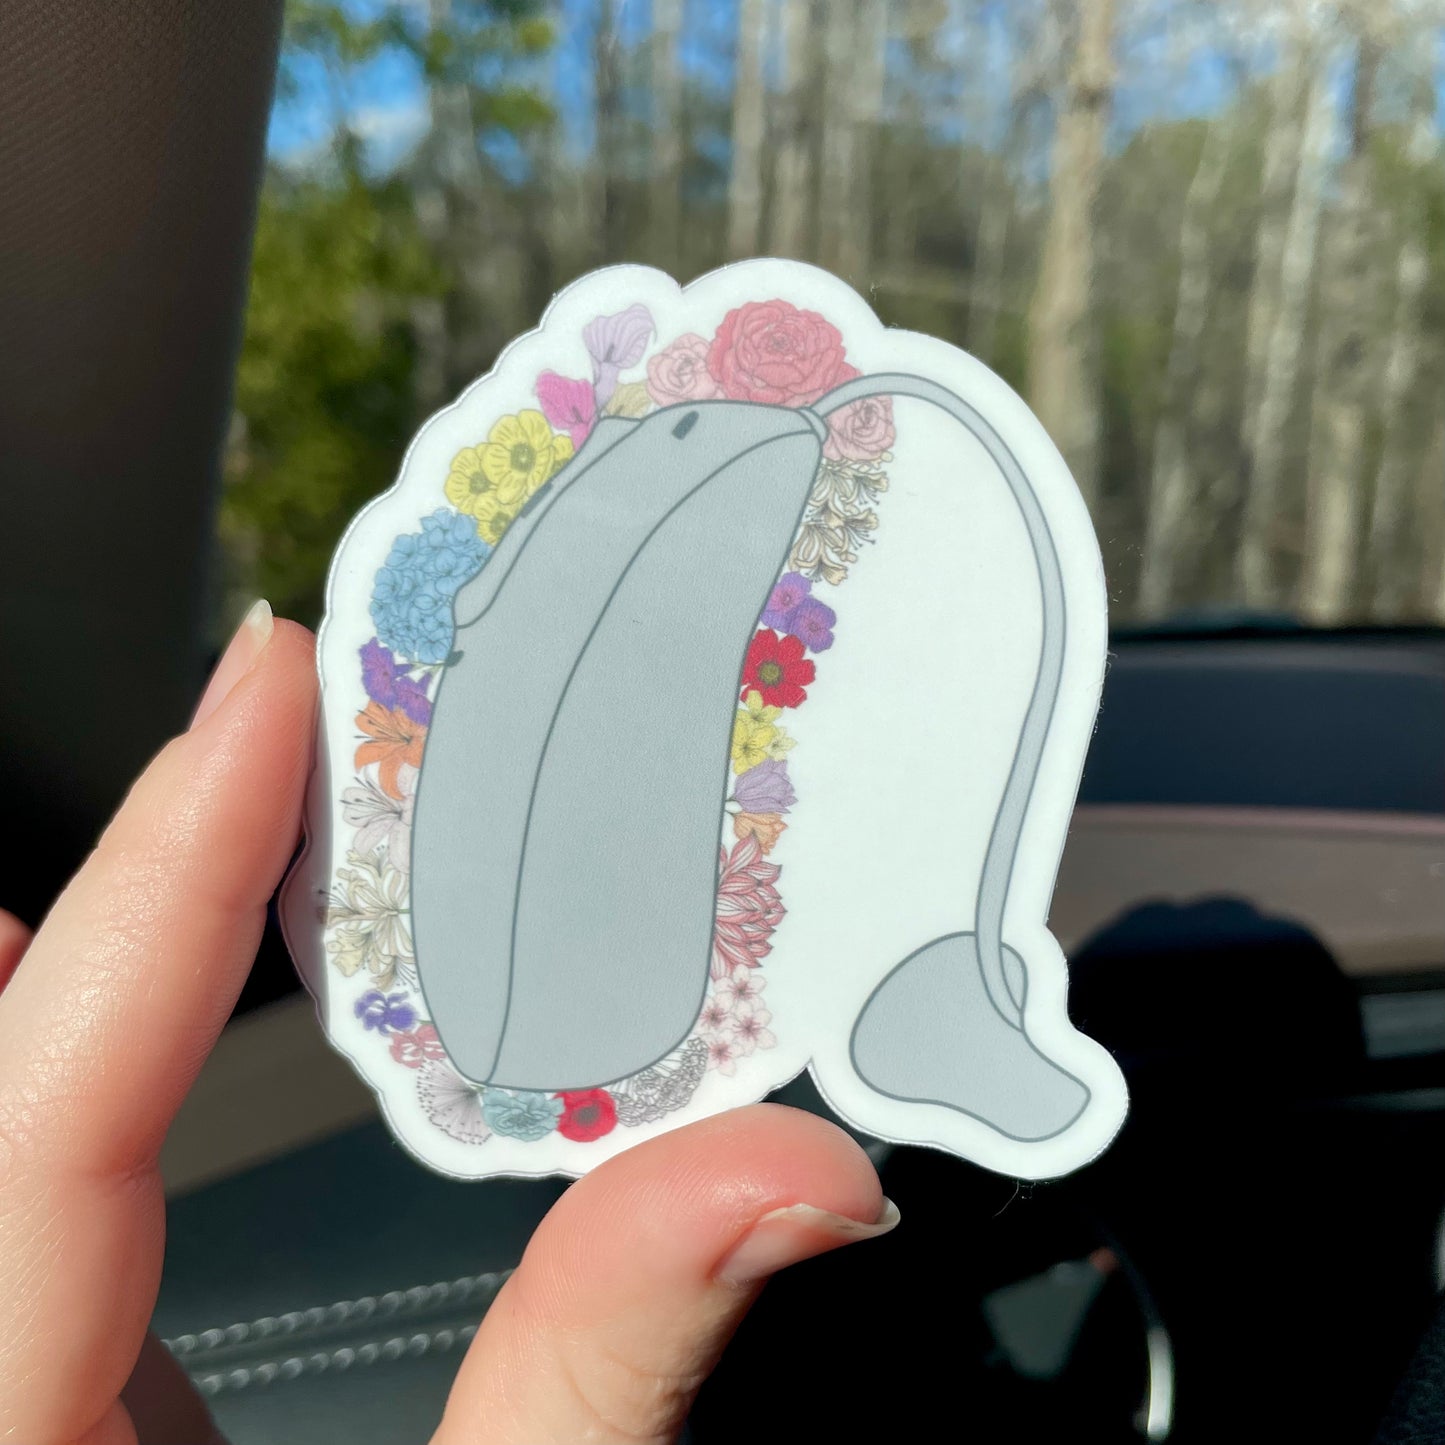 Floral Hearing Aid Sticker (Fitted Earpiece) Waterproof/Dishwasher Safe